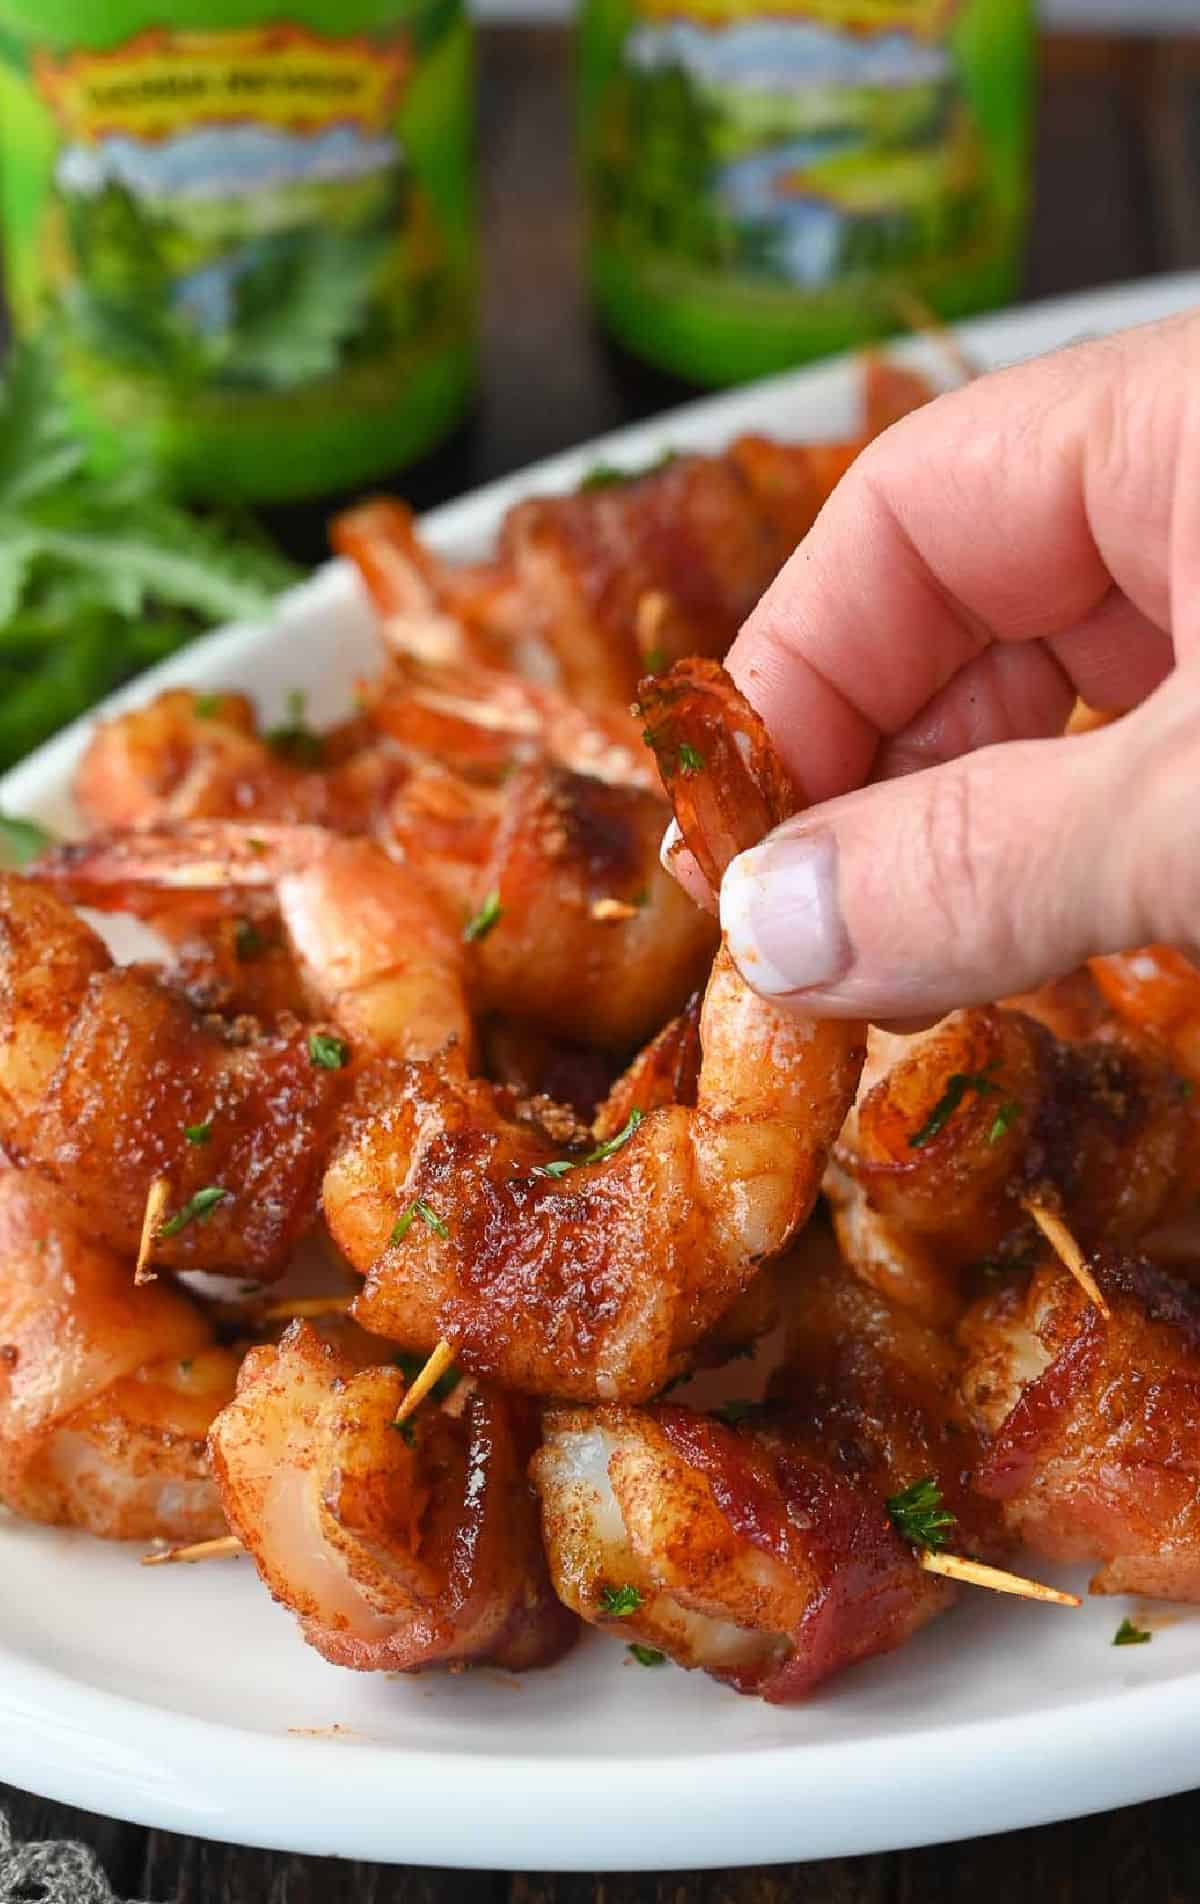 Bacon wrapped shrimp on a plate and one being grabbed.